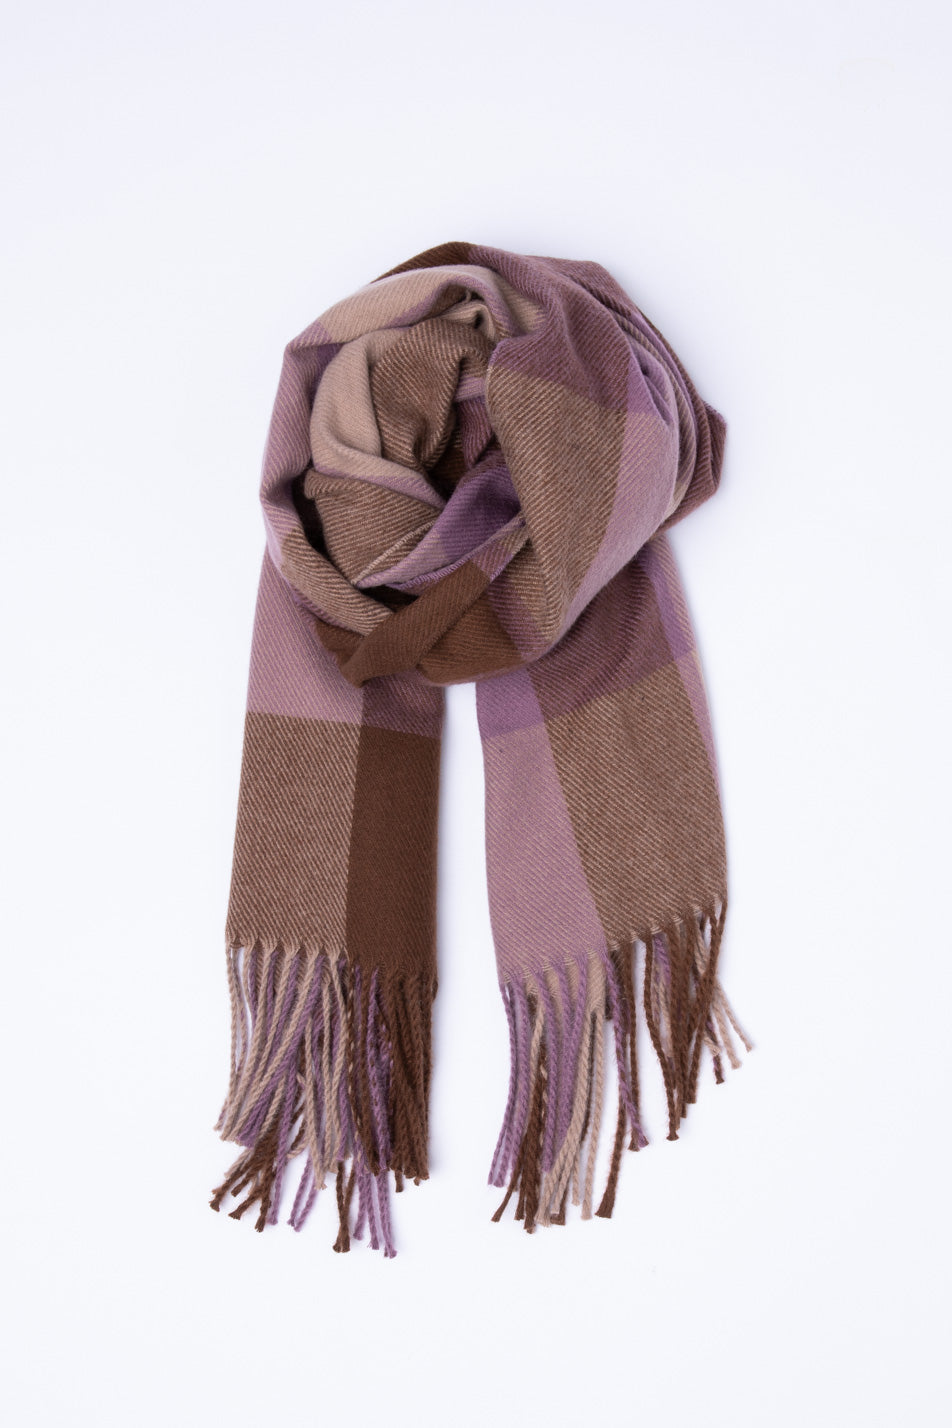 COME CHECK THIS RECTANGLE SCARF